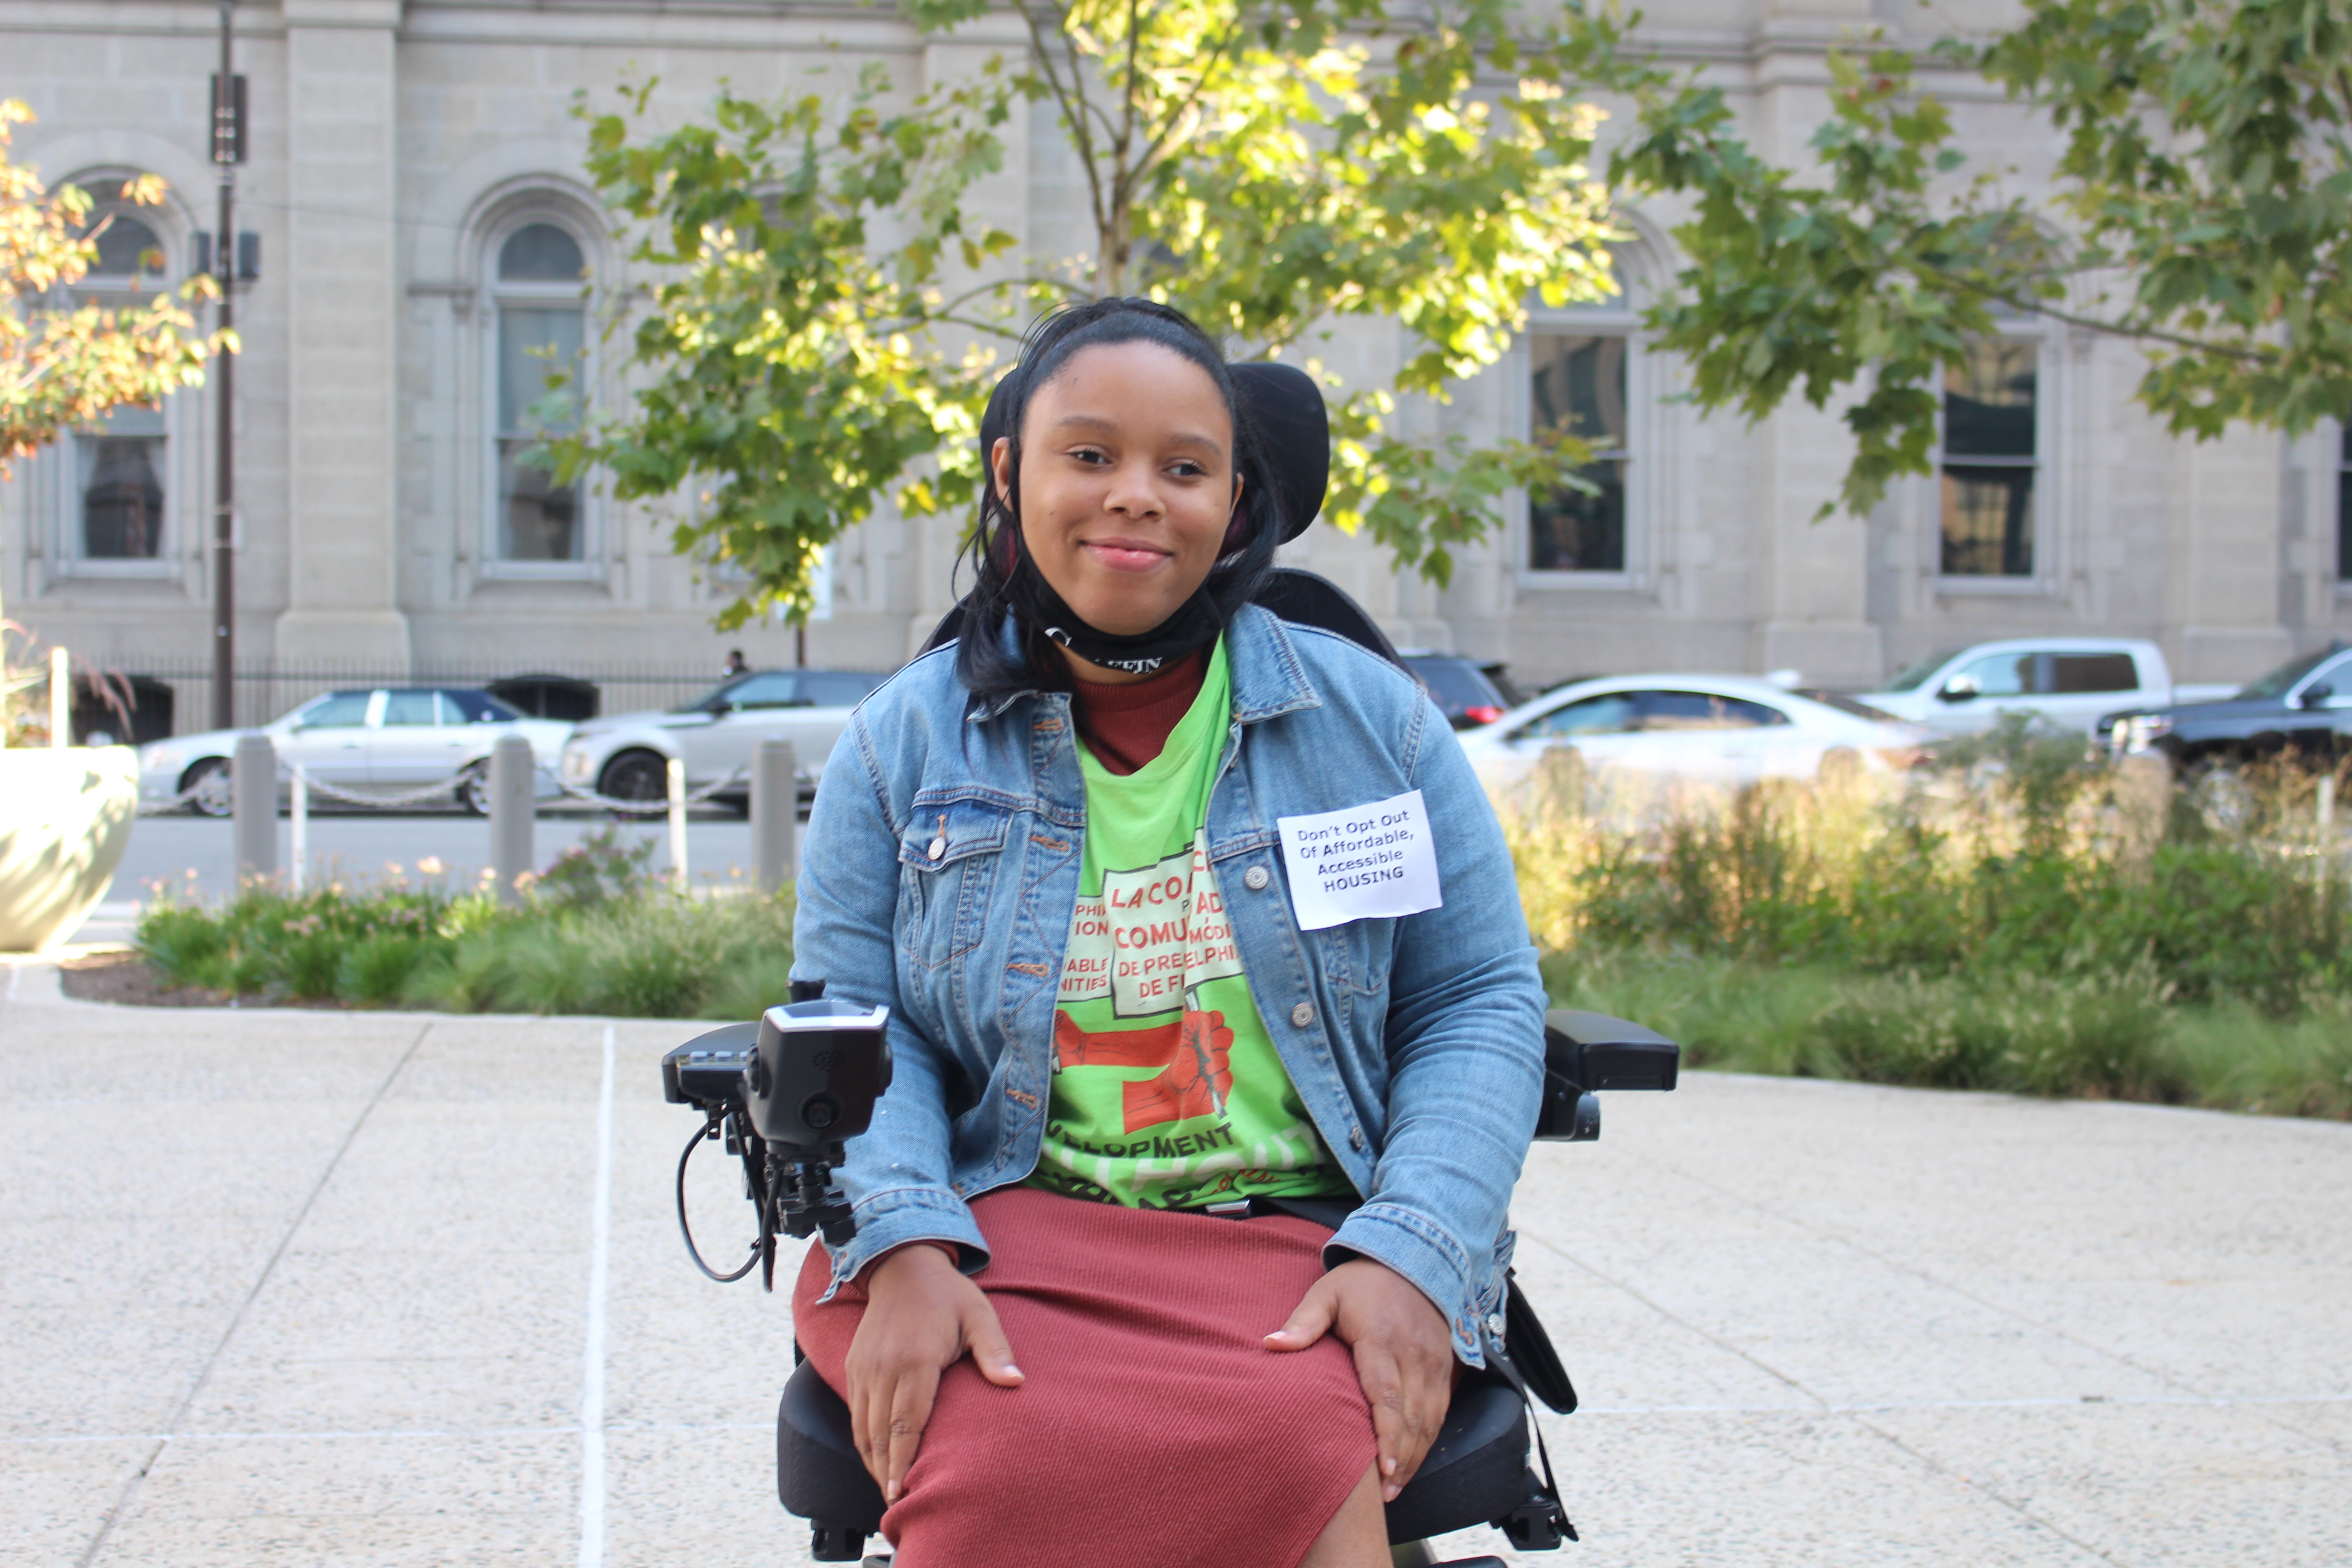 Domonique Howell, a Black woman sitting in a motorized wheelchair. She is wearing a paper badge that reads "Don't opt out of affordable, accessible housing"